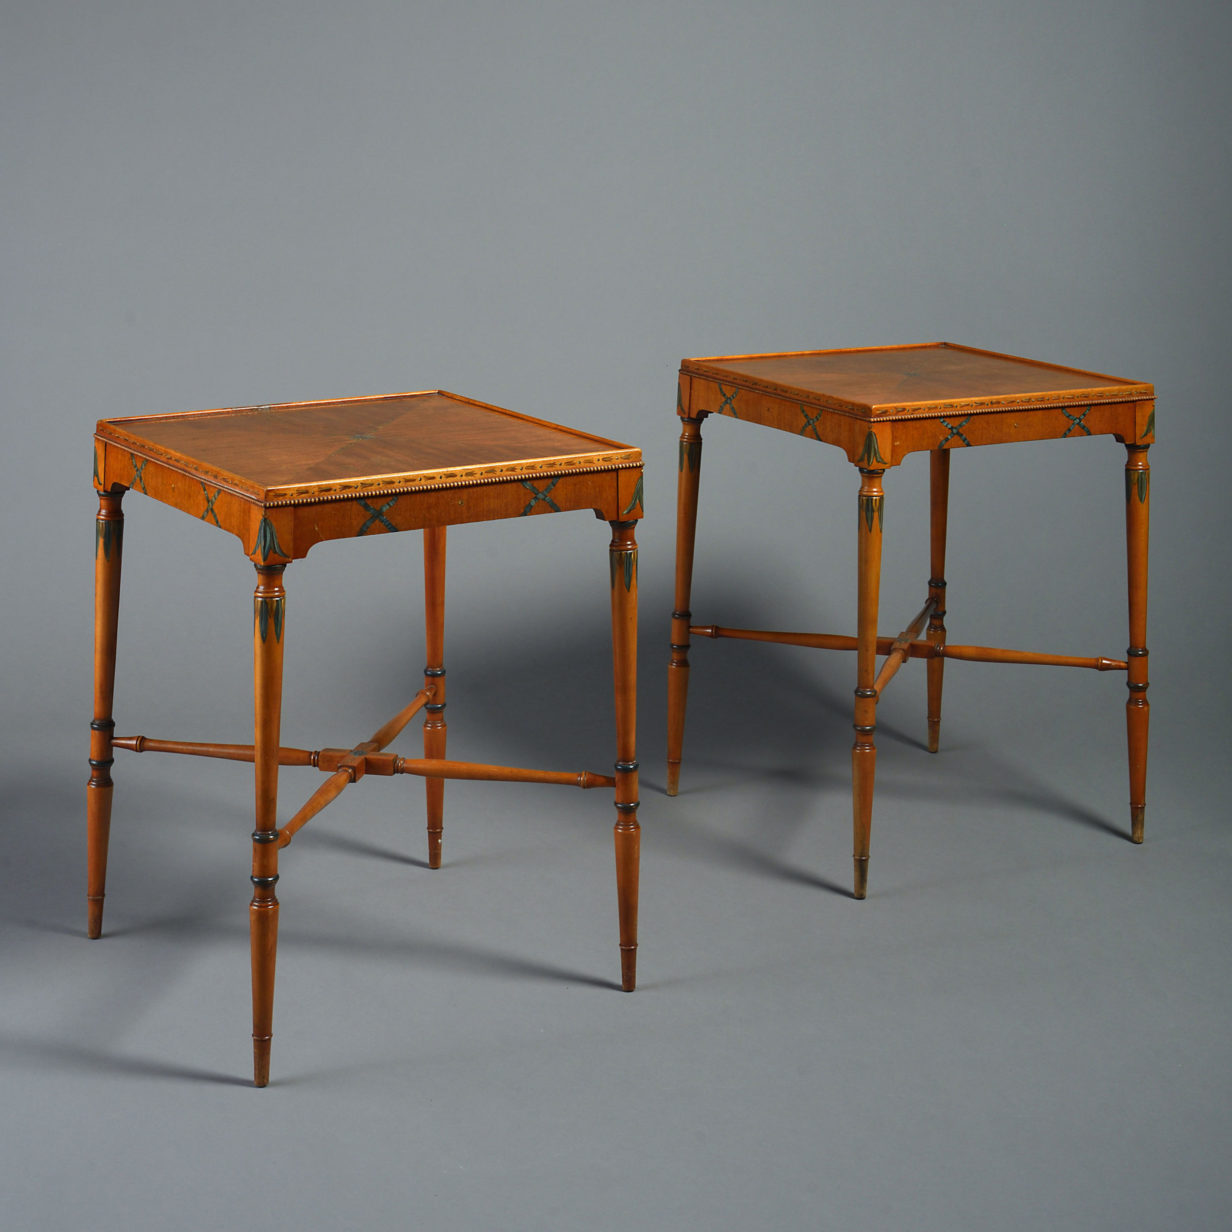 A pair of satinwood end tables in the sheraton taste